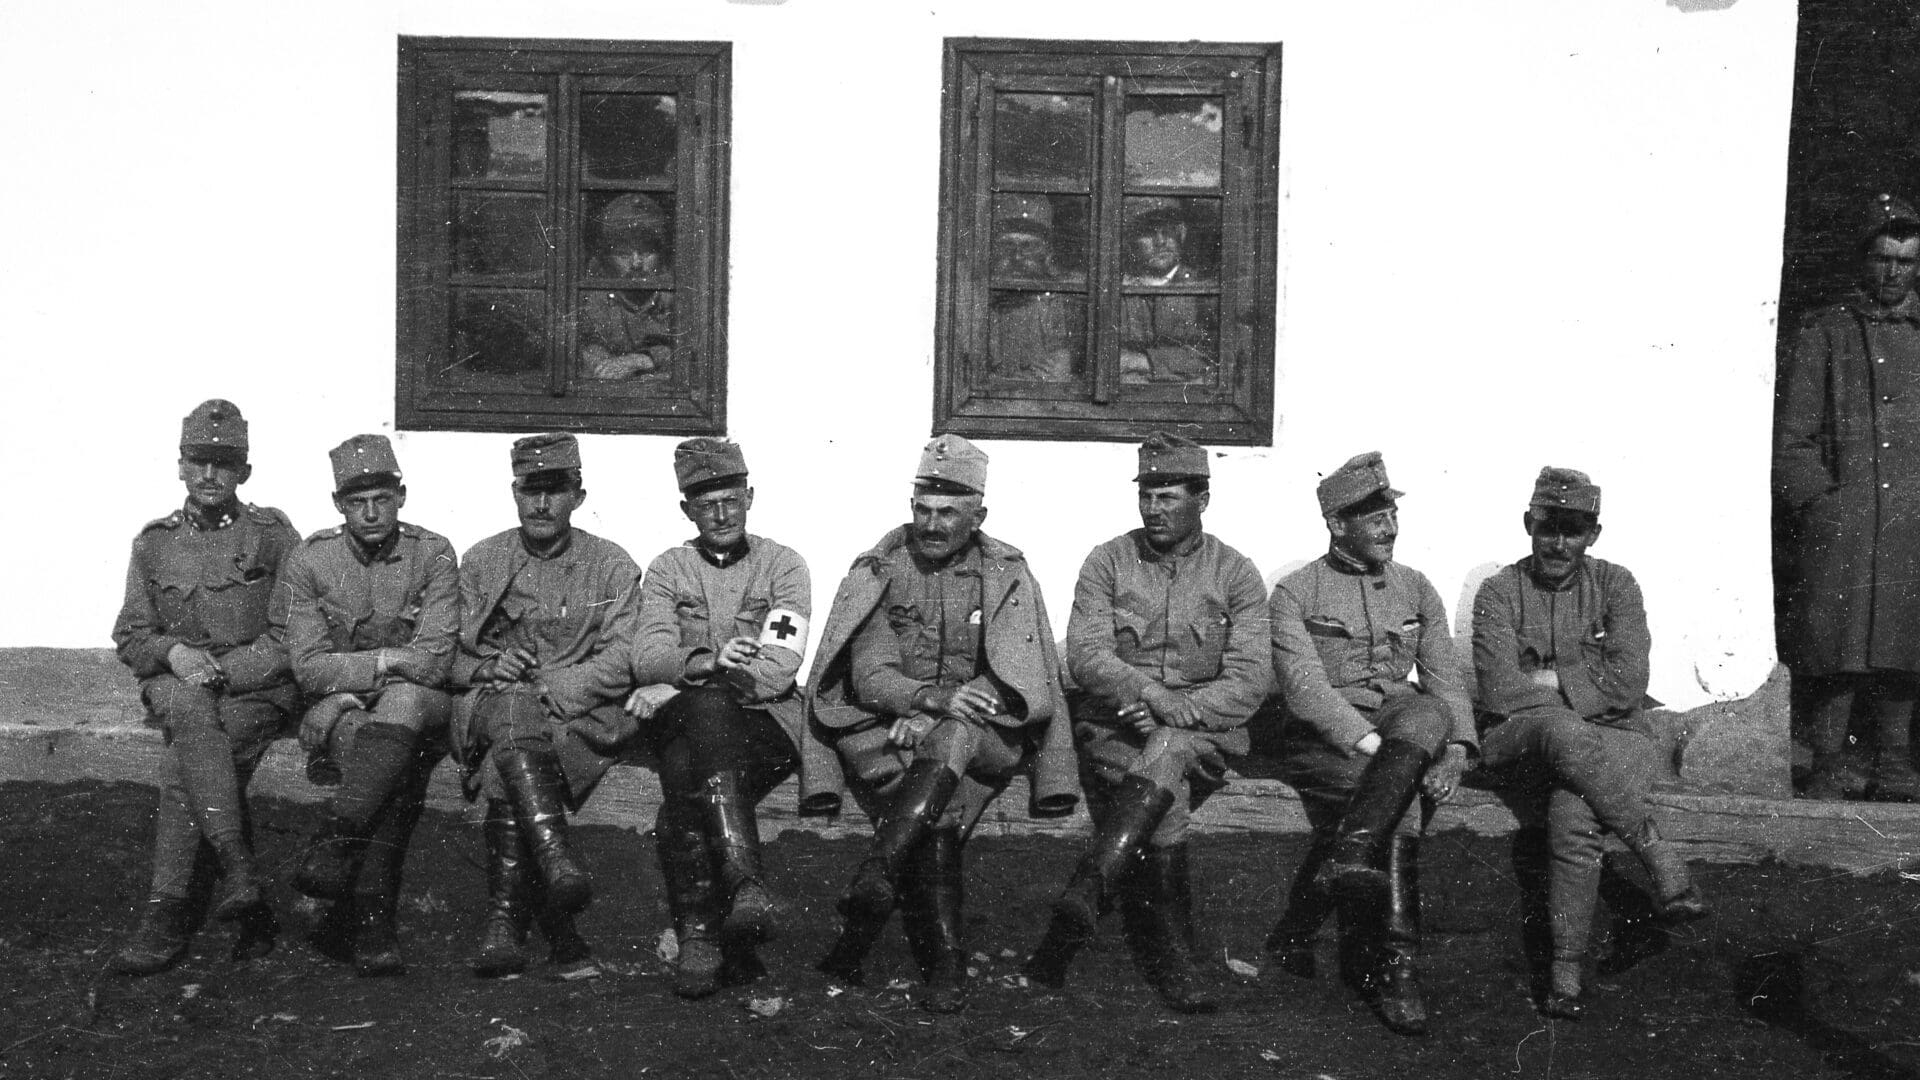 Austro-Hungarian soldiers in 1914.